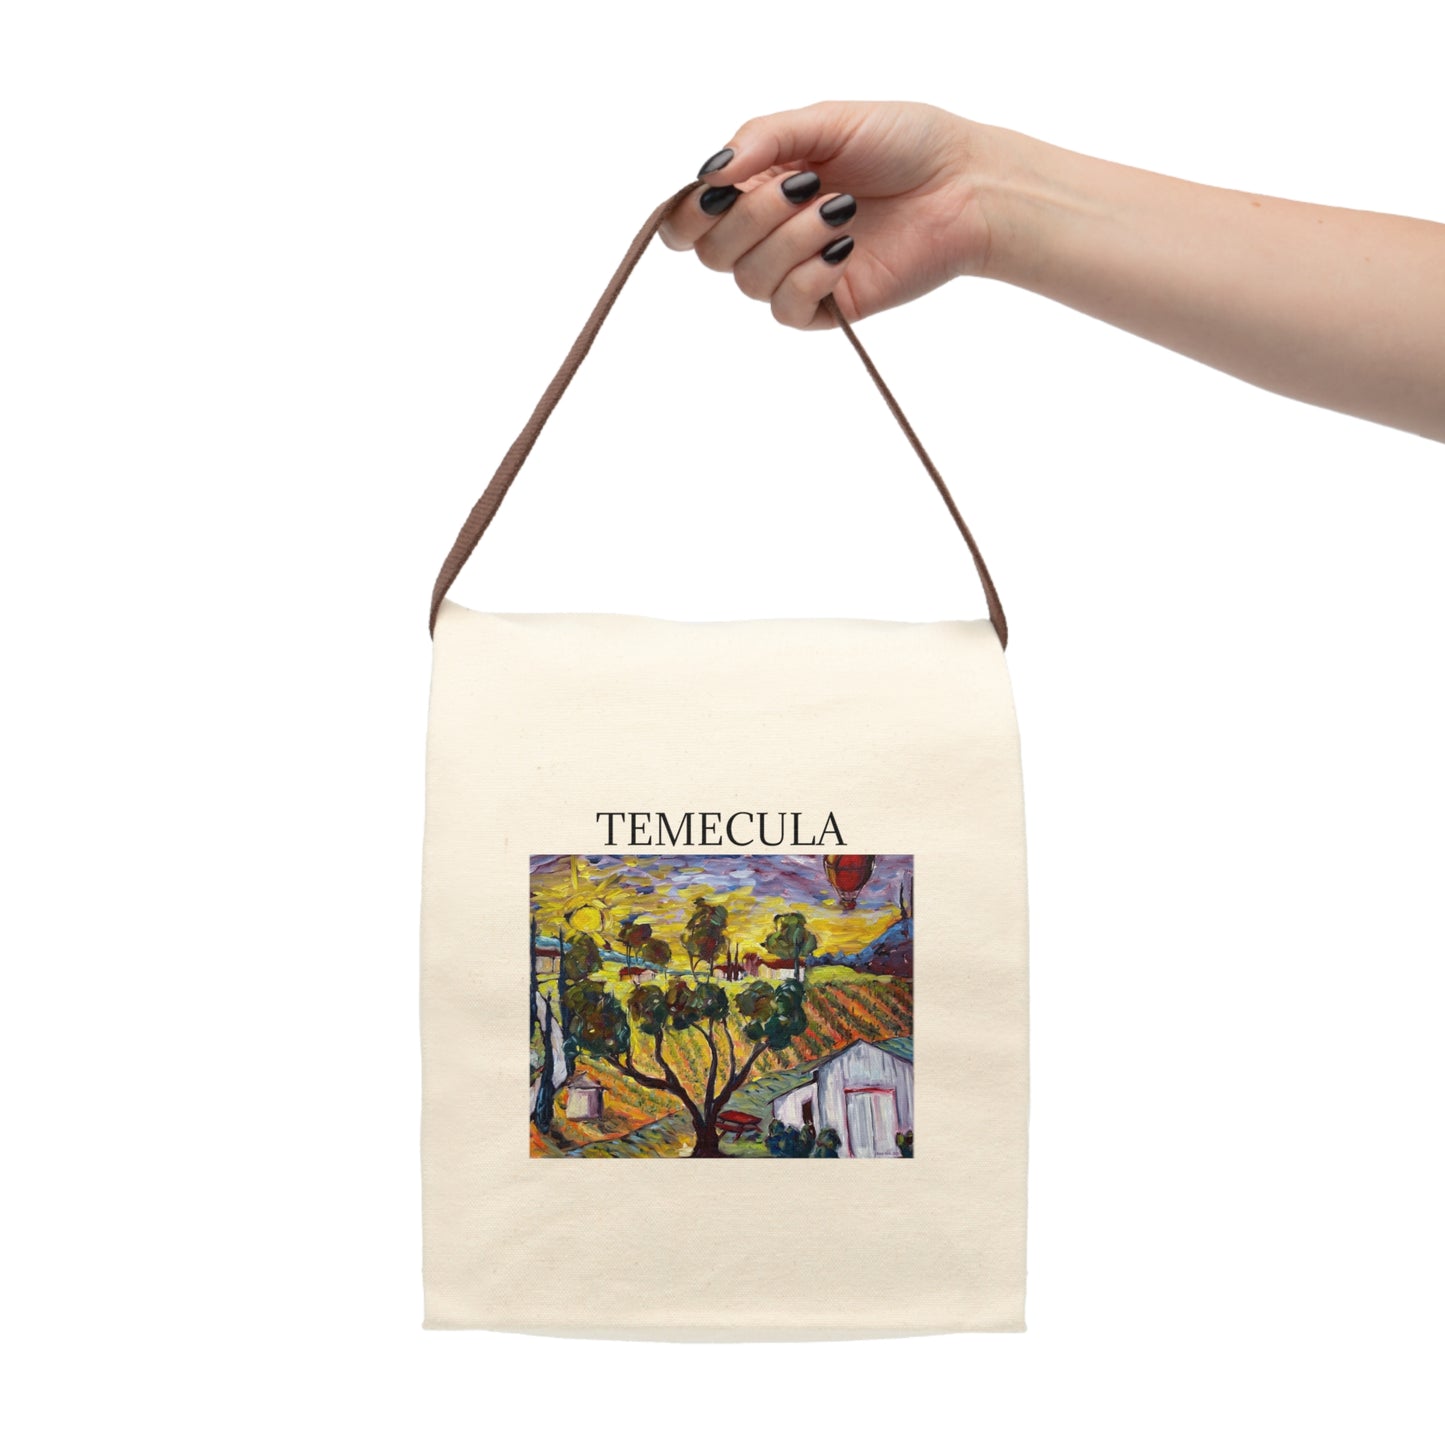 Ultimate Sunrise "Temecula" Canvas Lunch Bag With Strap